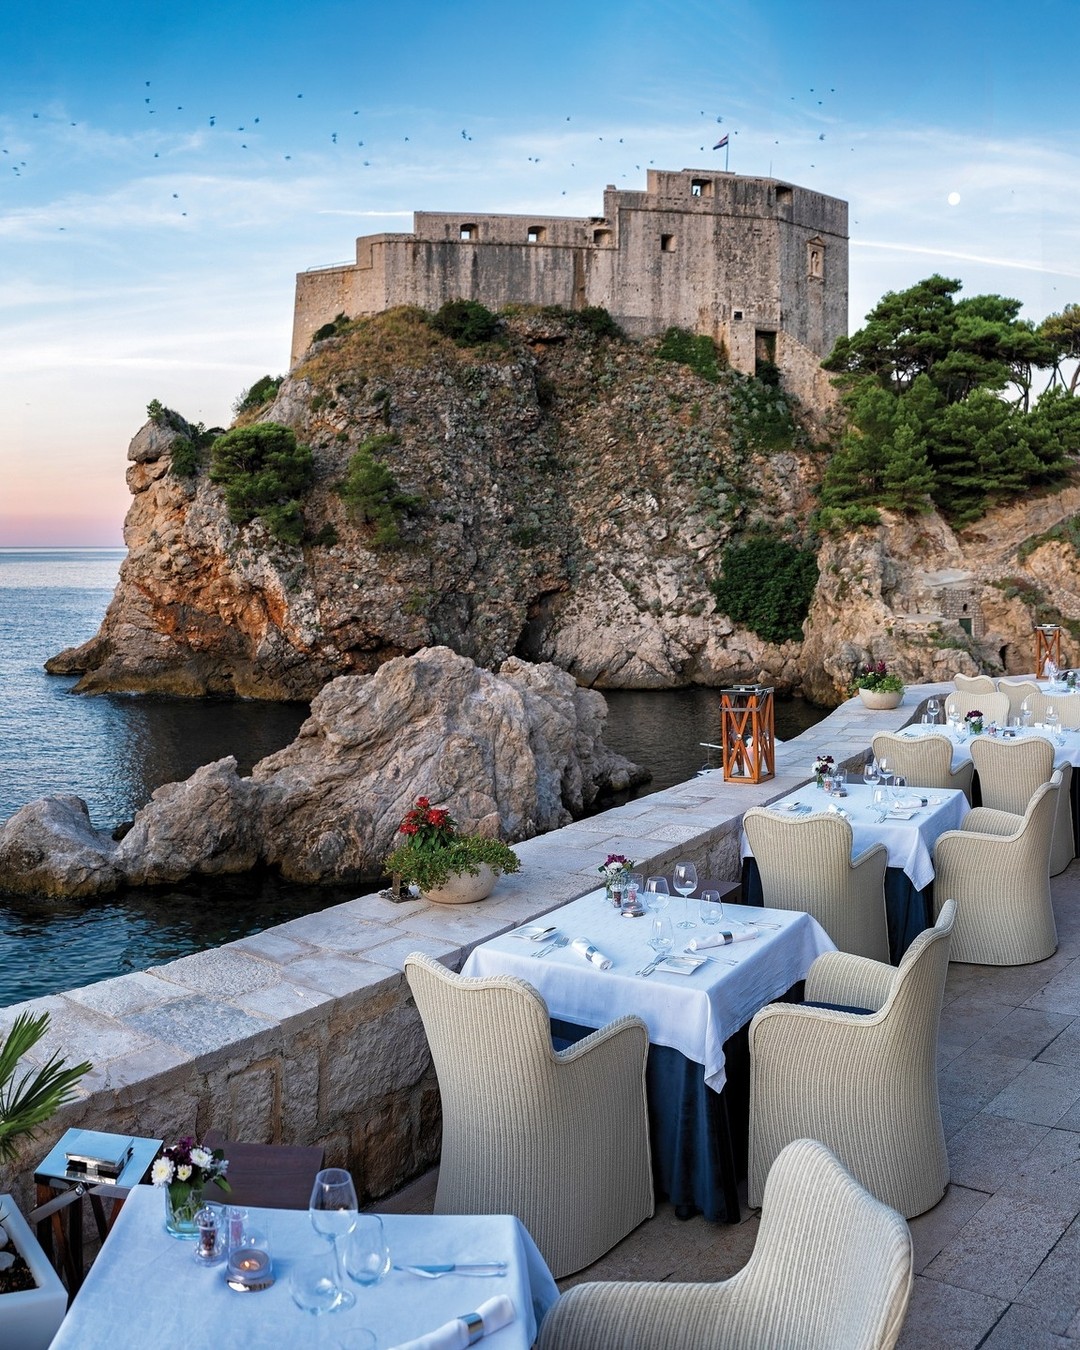 The perfect setting for an unforgettable dinning experience at Nautika Restaurant - Europe's 20 Best Outdoor Restaurants